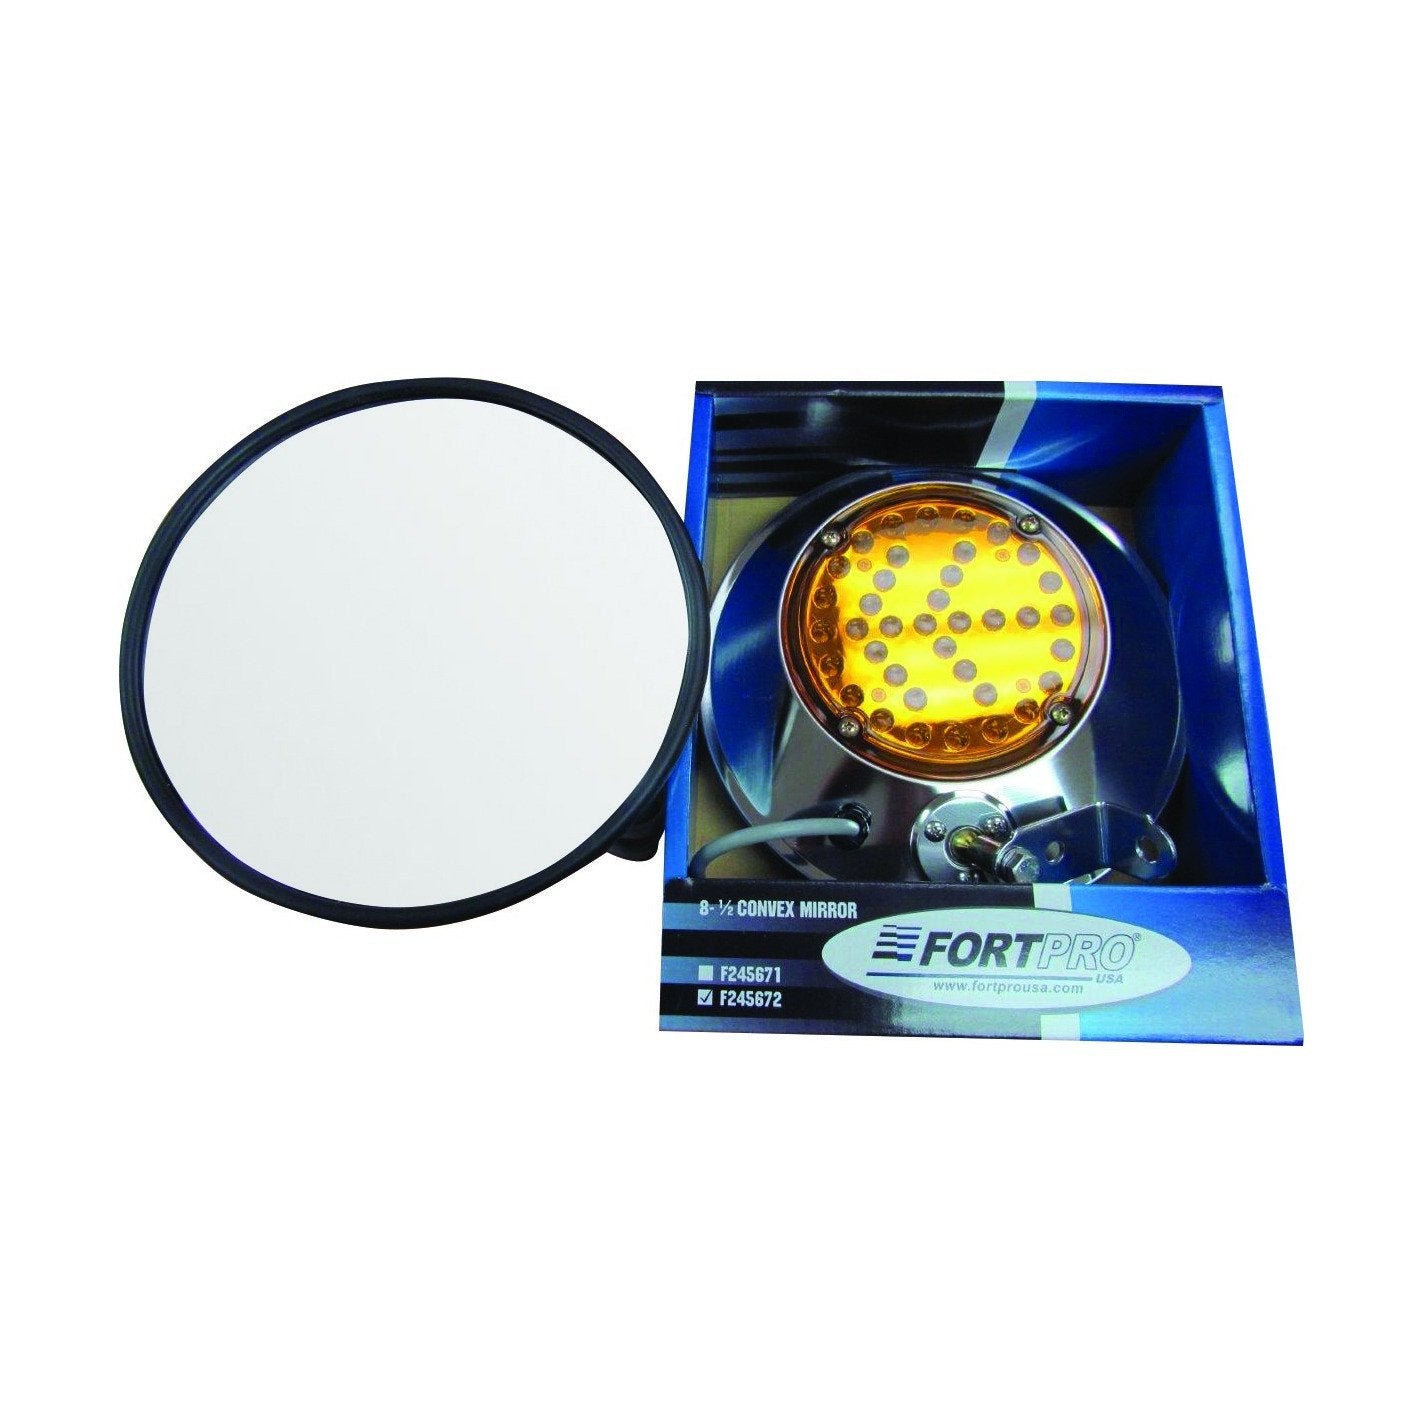 8 1/2" Convex Mirror Stainless Steel With Led Turn Signal - Passenger Side | F245671